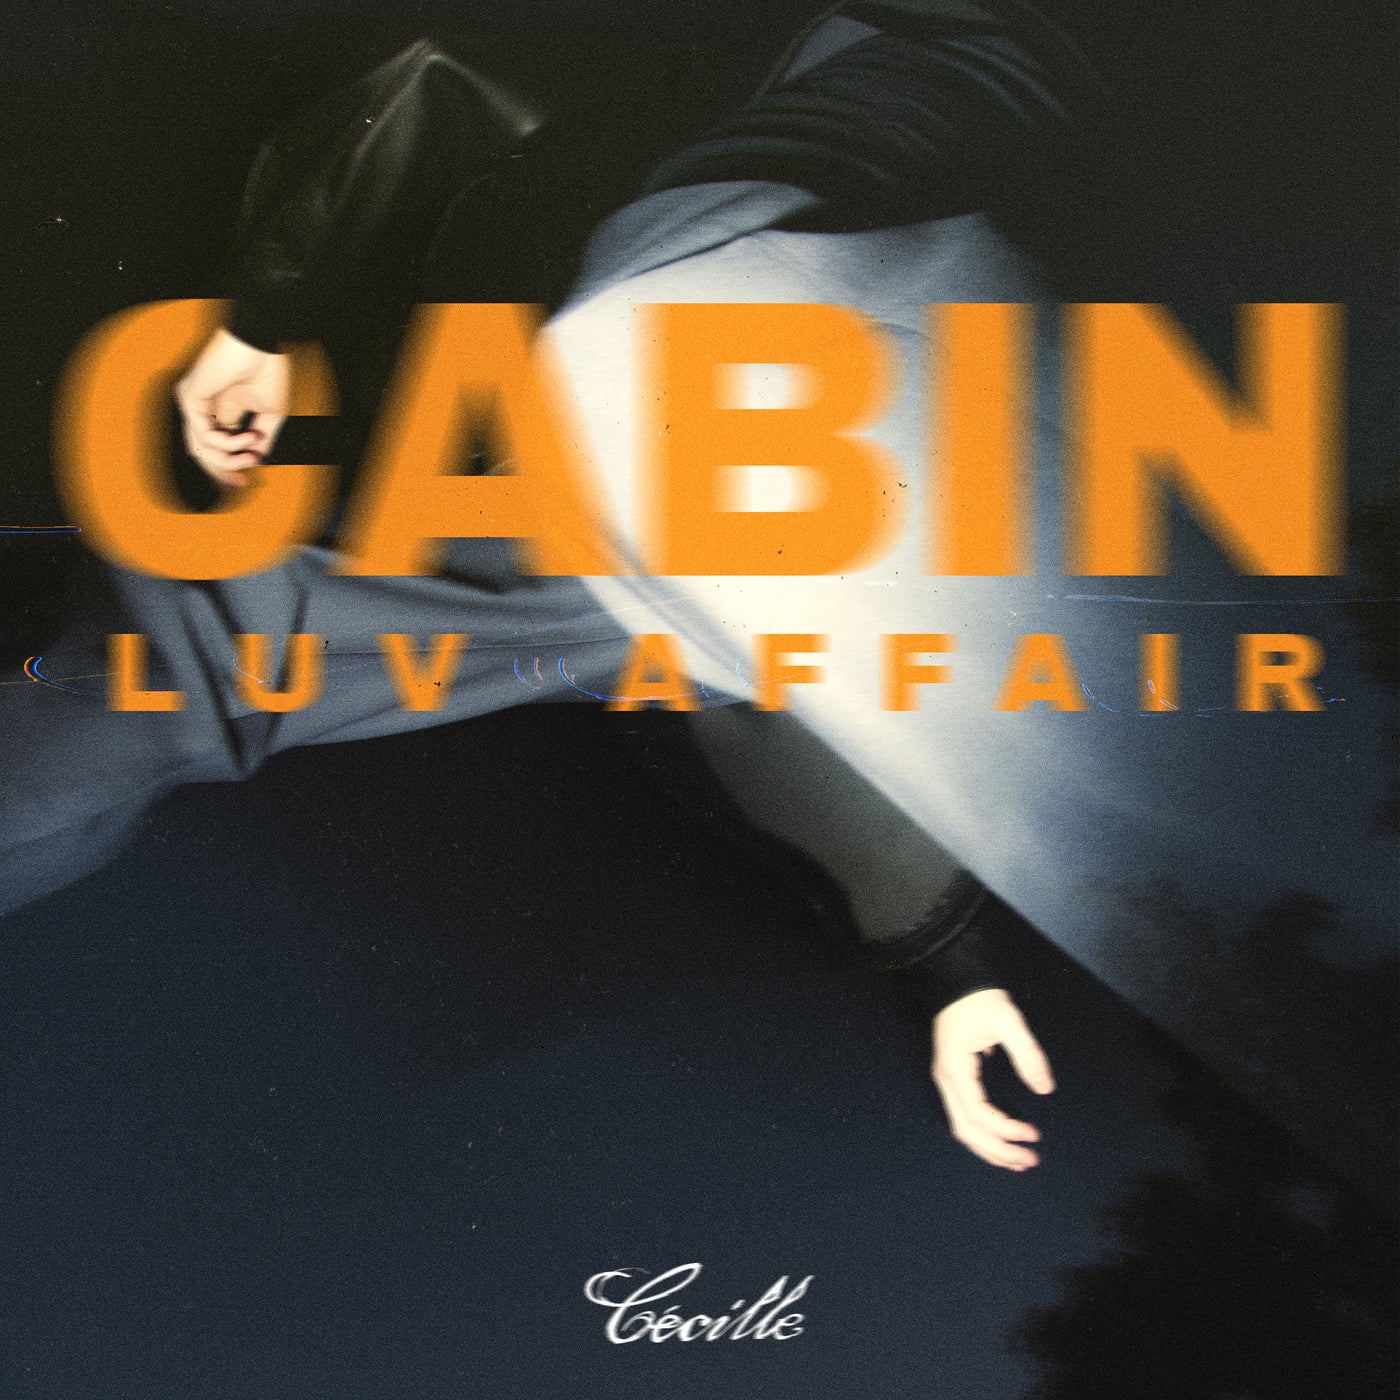 image cover: Cabin Luv Affair - Cécille presents on Cecille